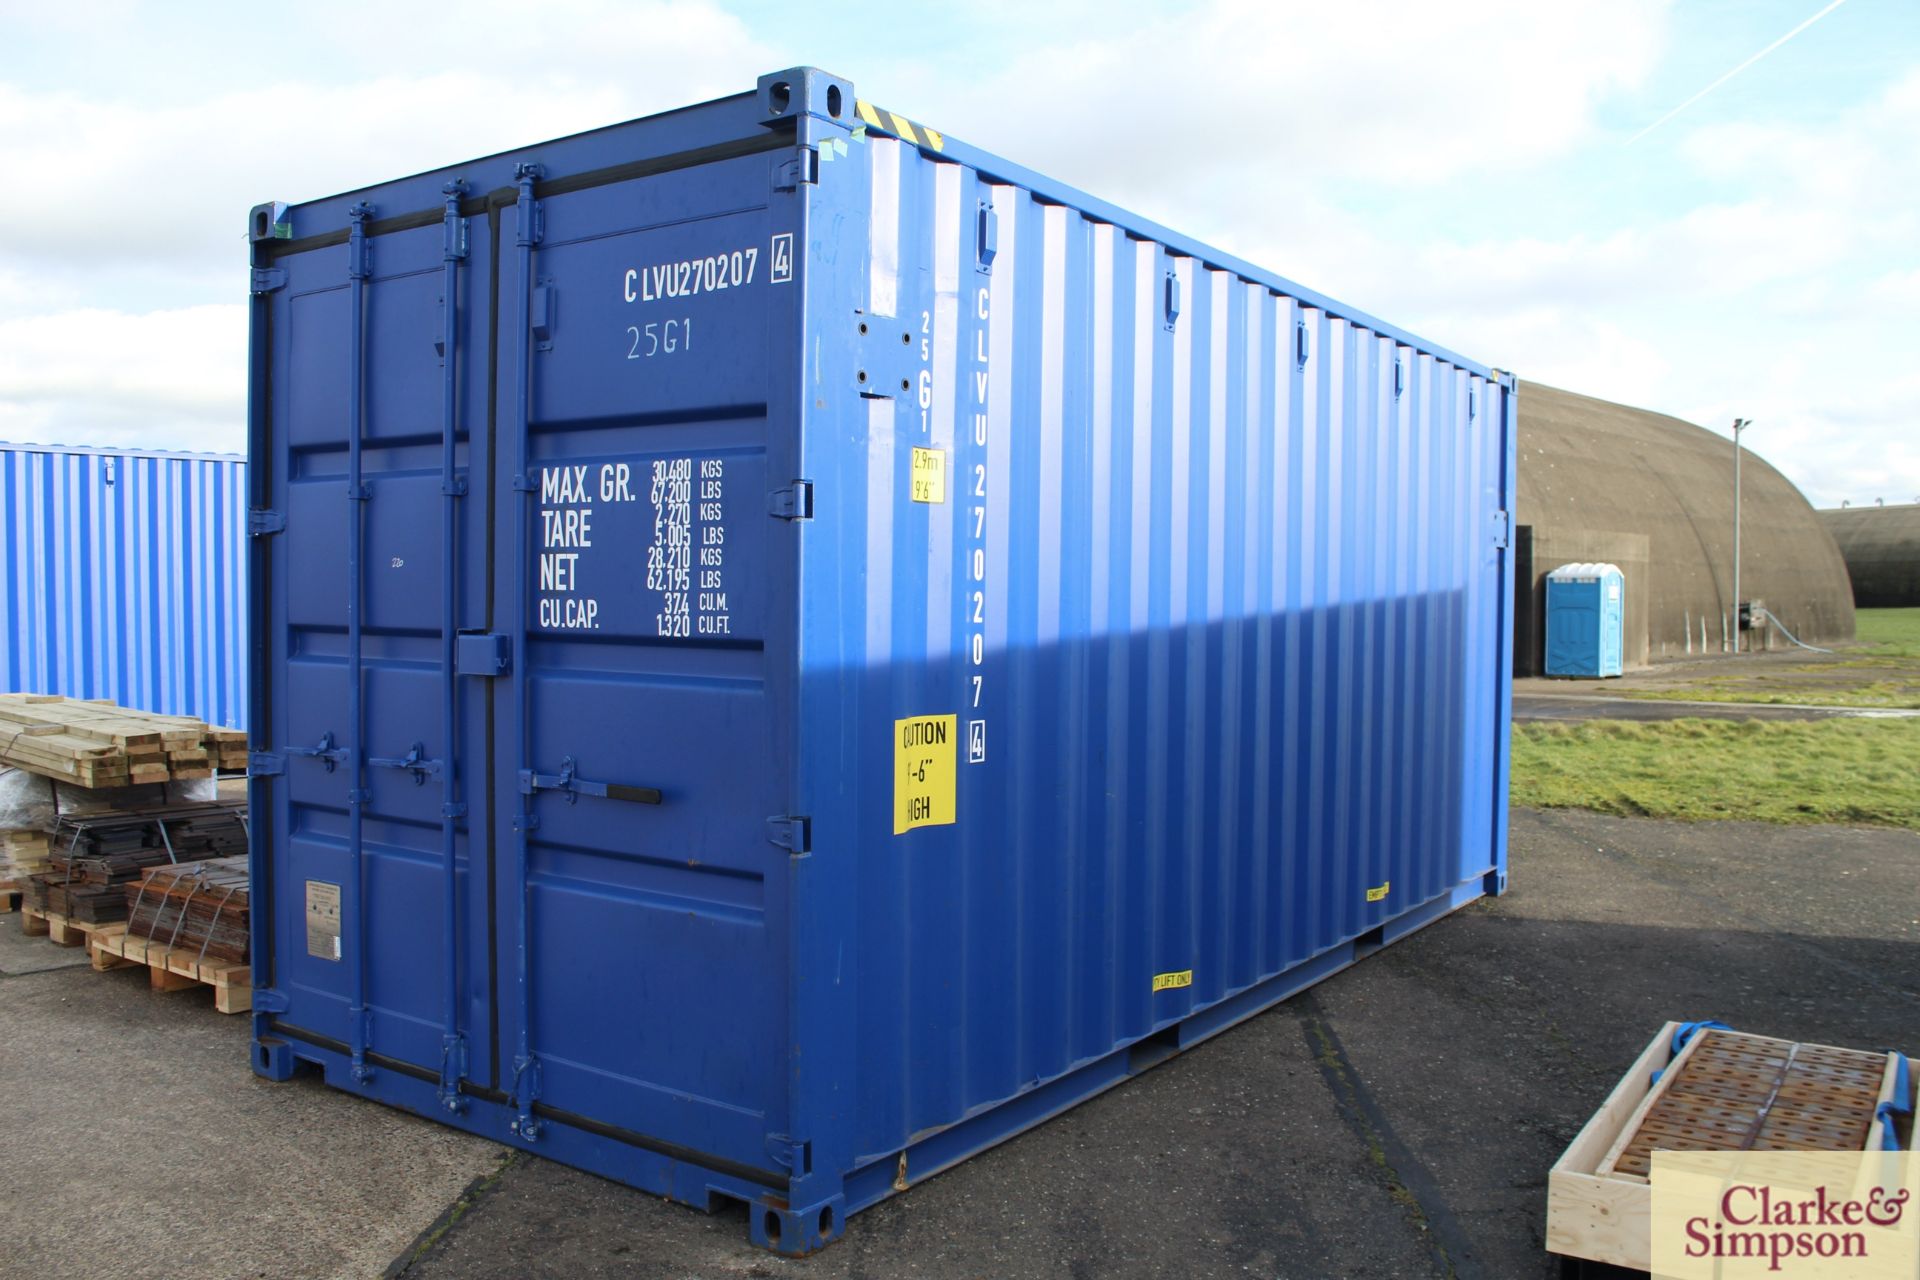 20ft x 9ft6in high shipping container. 2019. Partially reinforced to interior to include plates